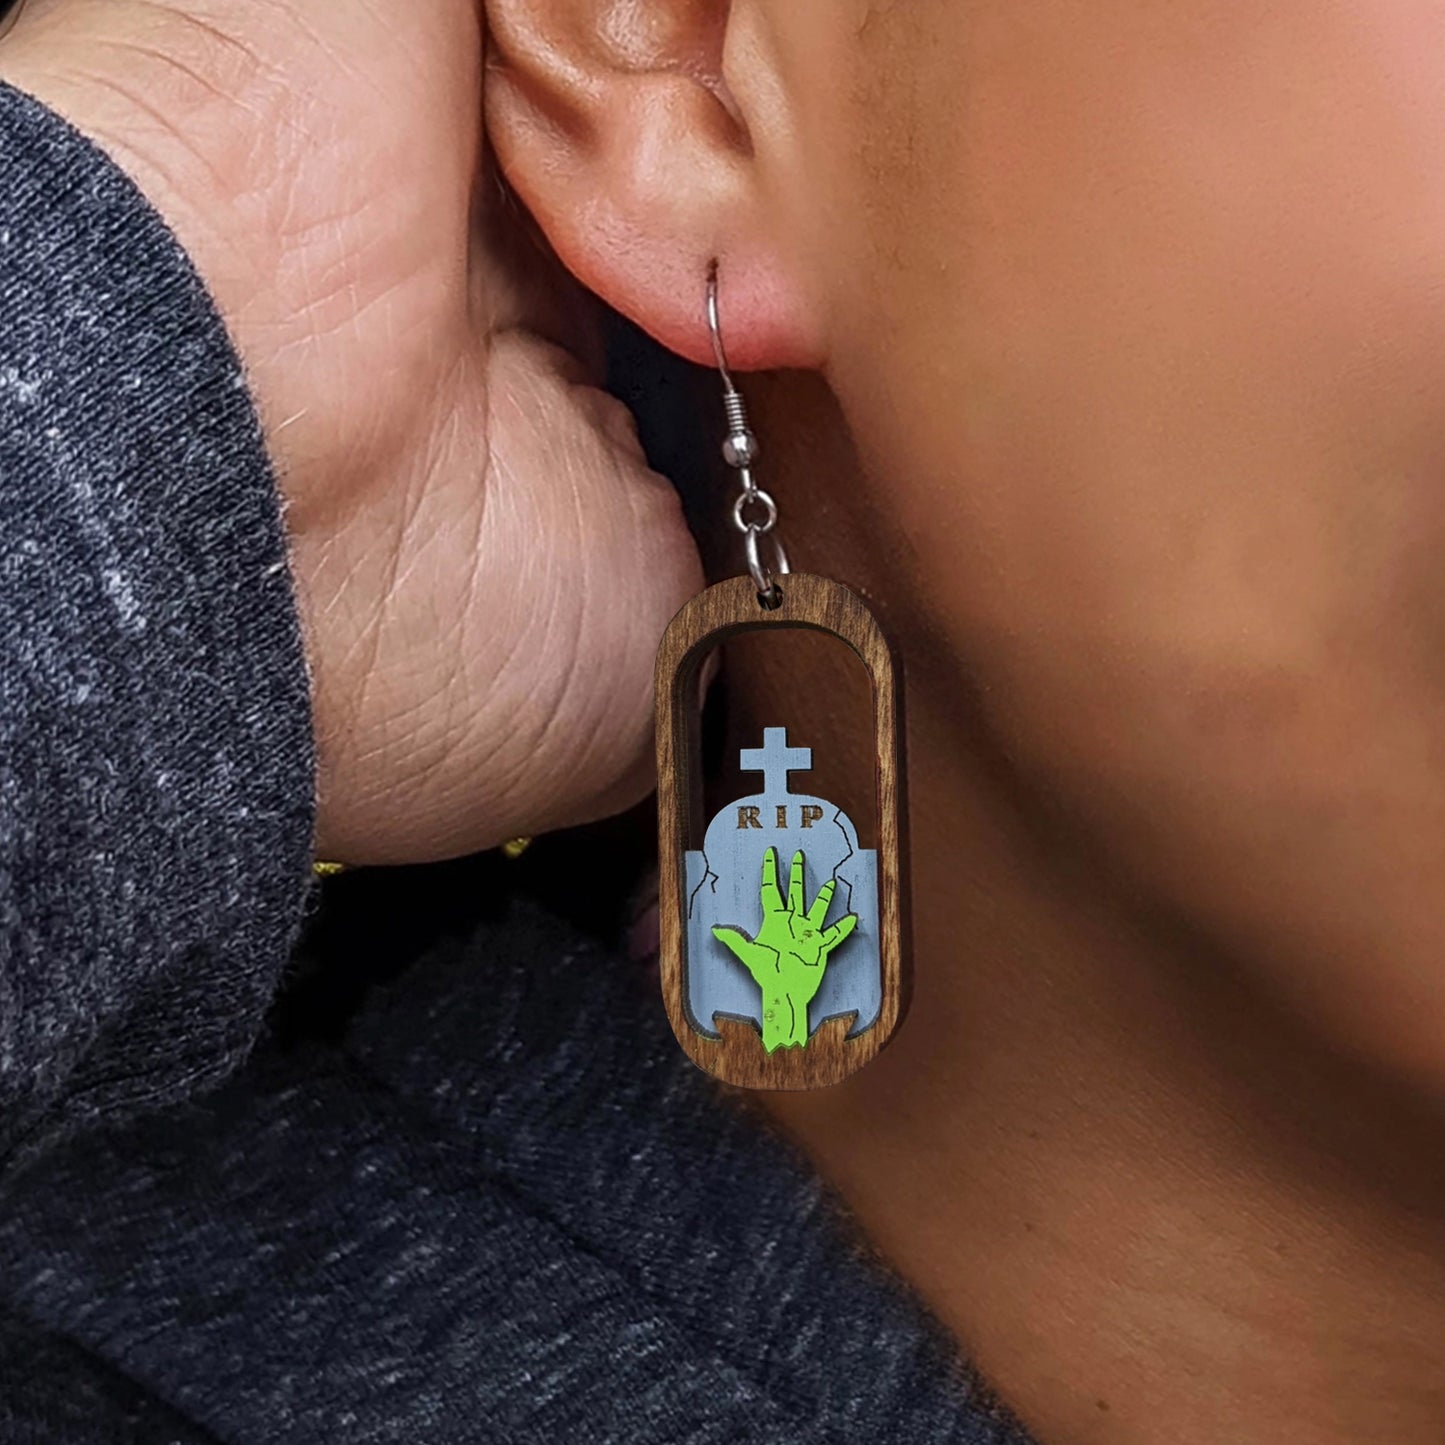 A female model wearing an oval-shaped wooden earring. The center of the earring is open, with a green zombie hand reaching upward in front of a tombstone.